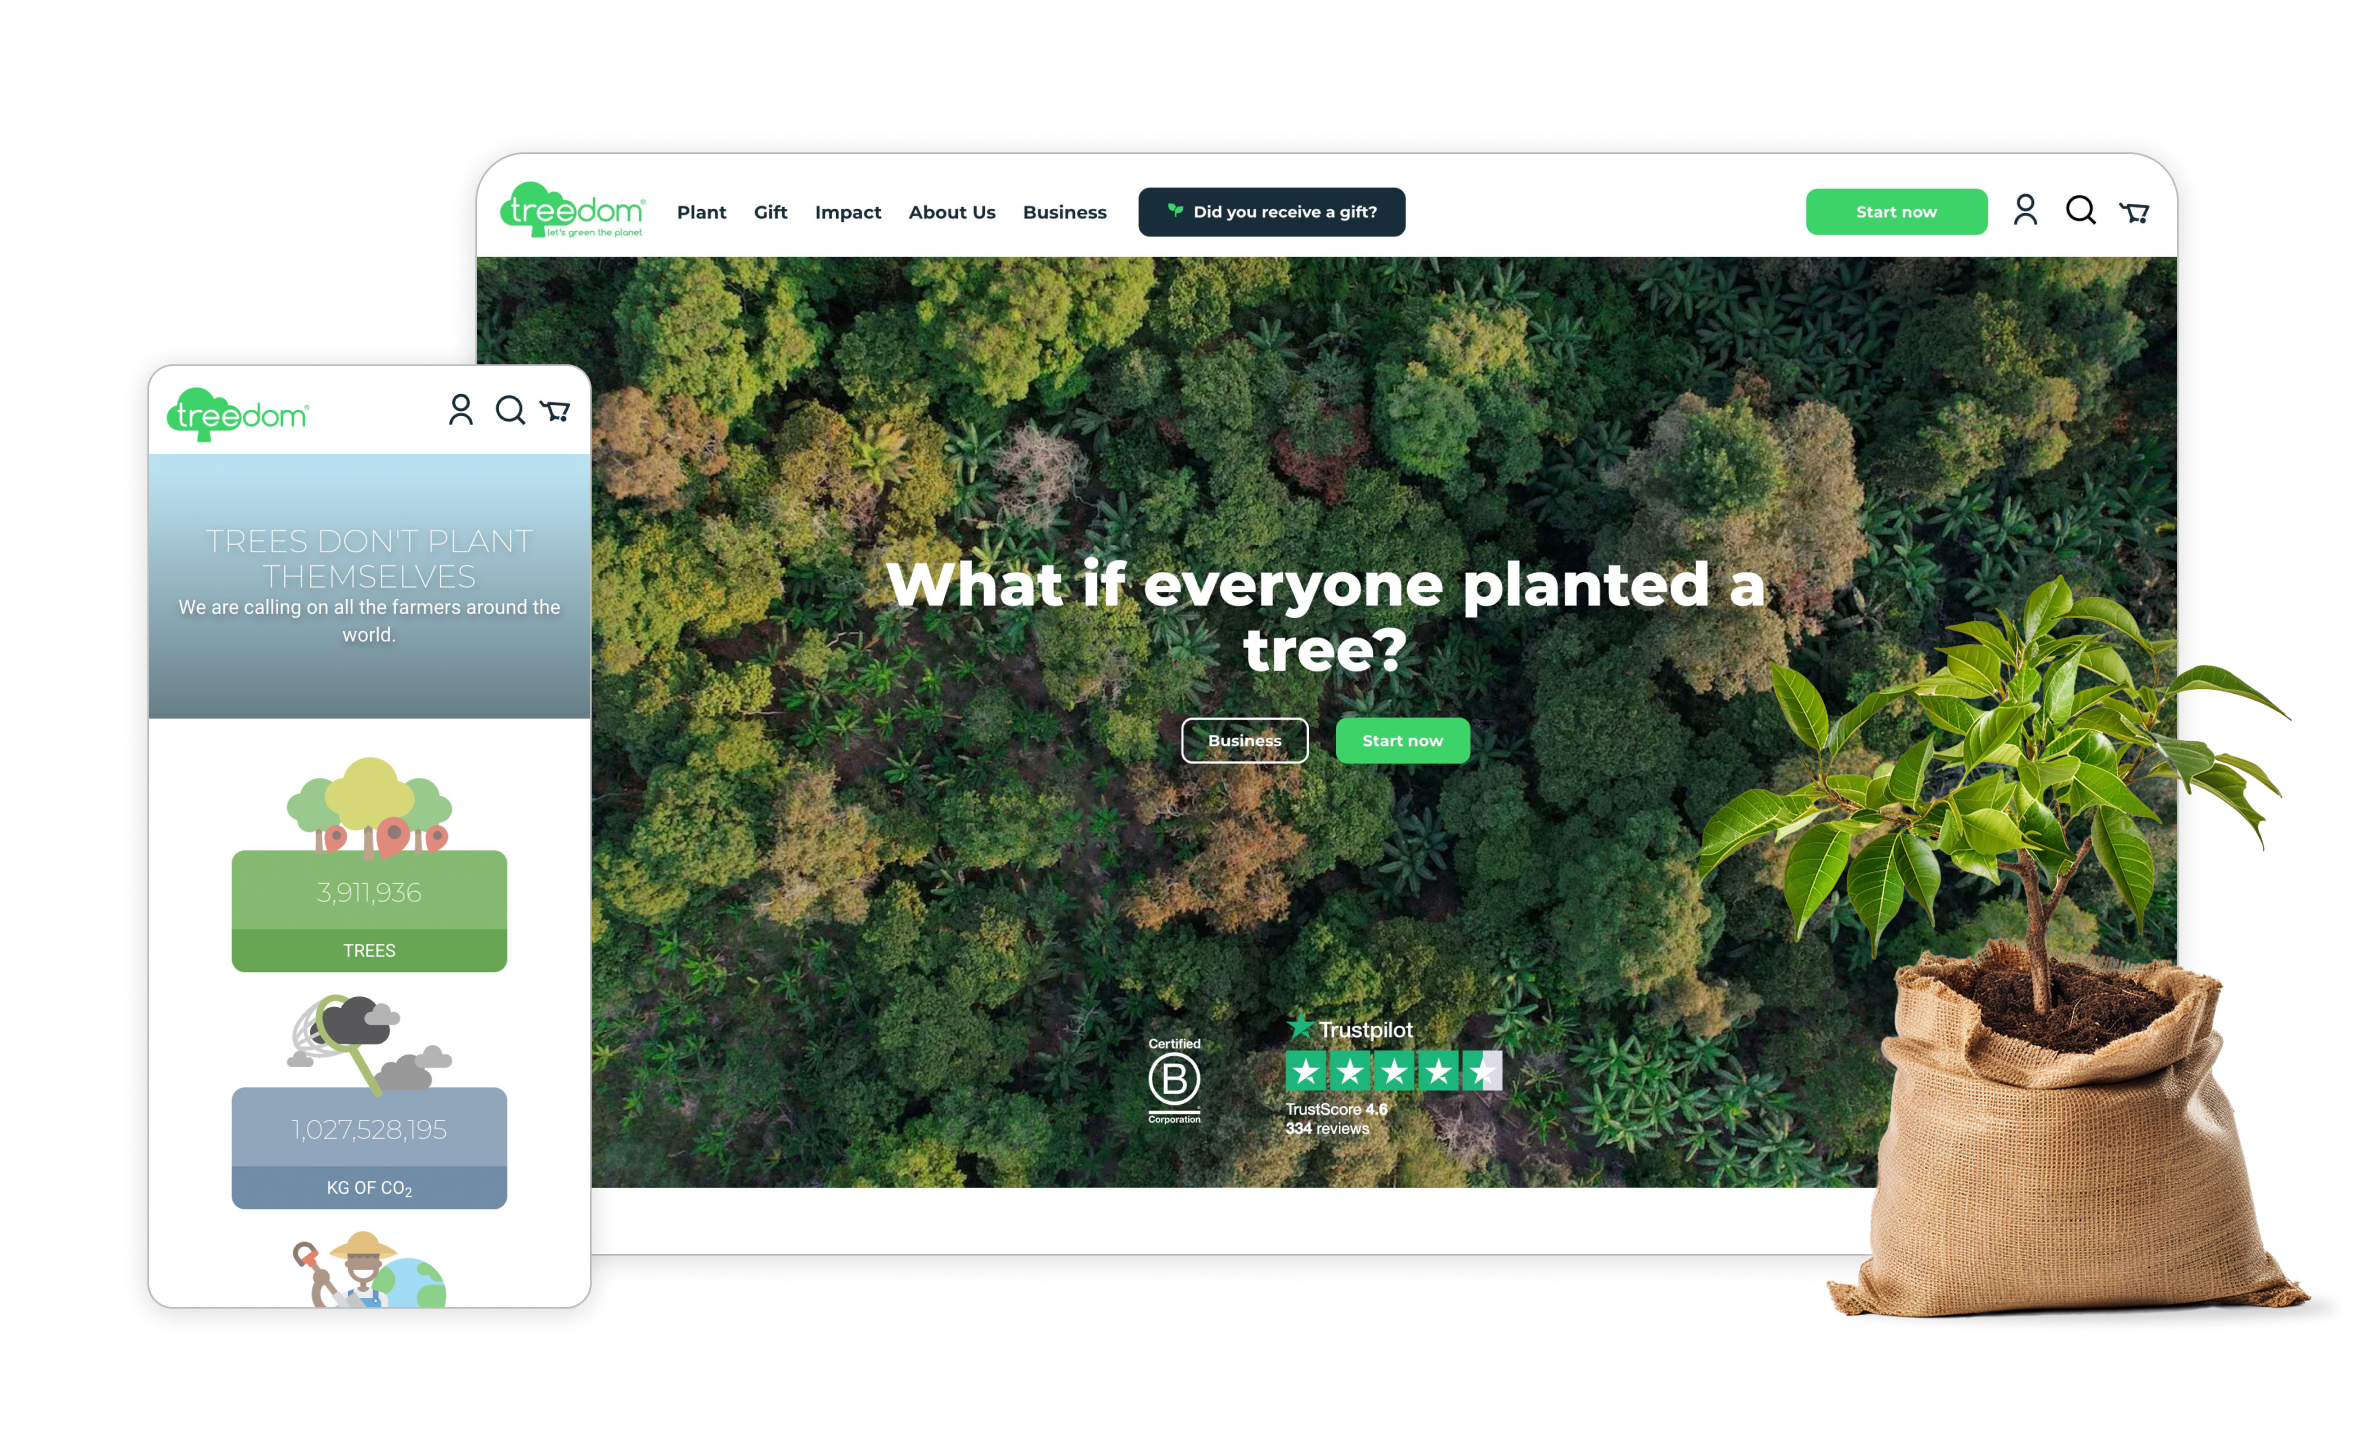 How Treedom branched out to commercetools and successfully migrated to composable commerce in just 5 months